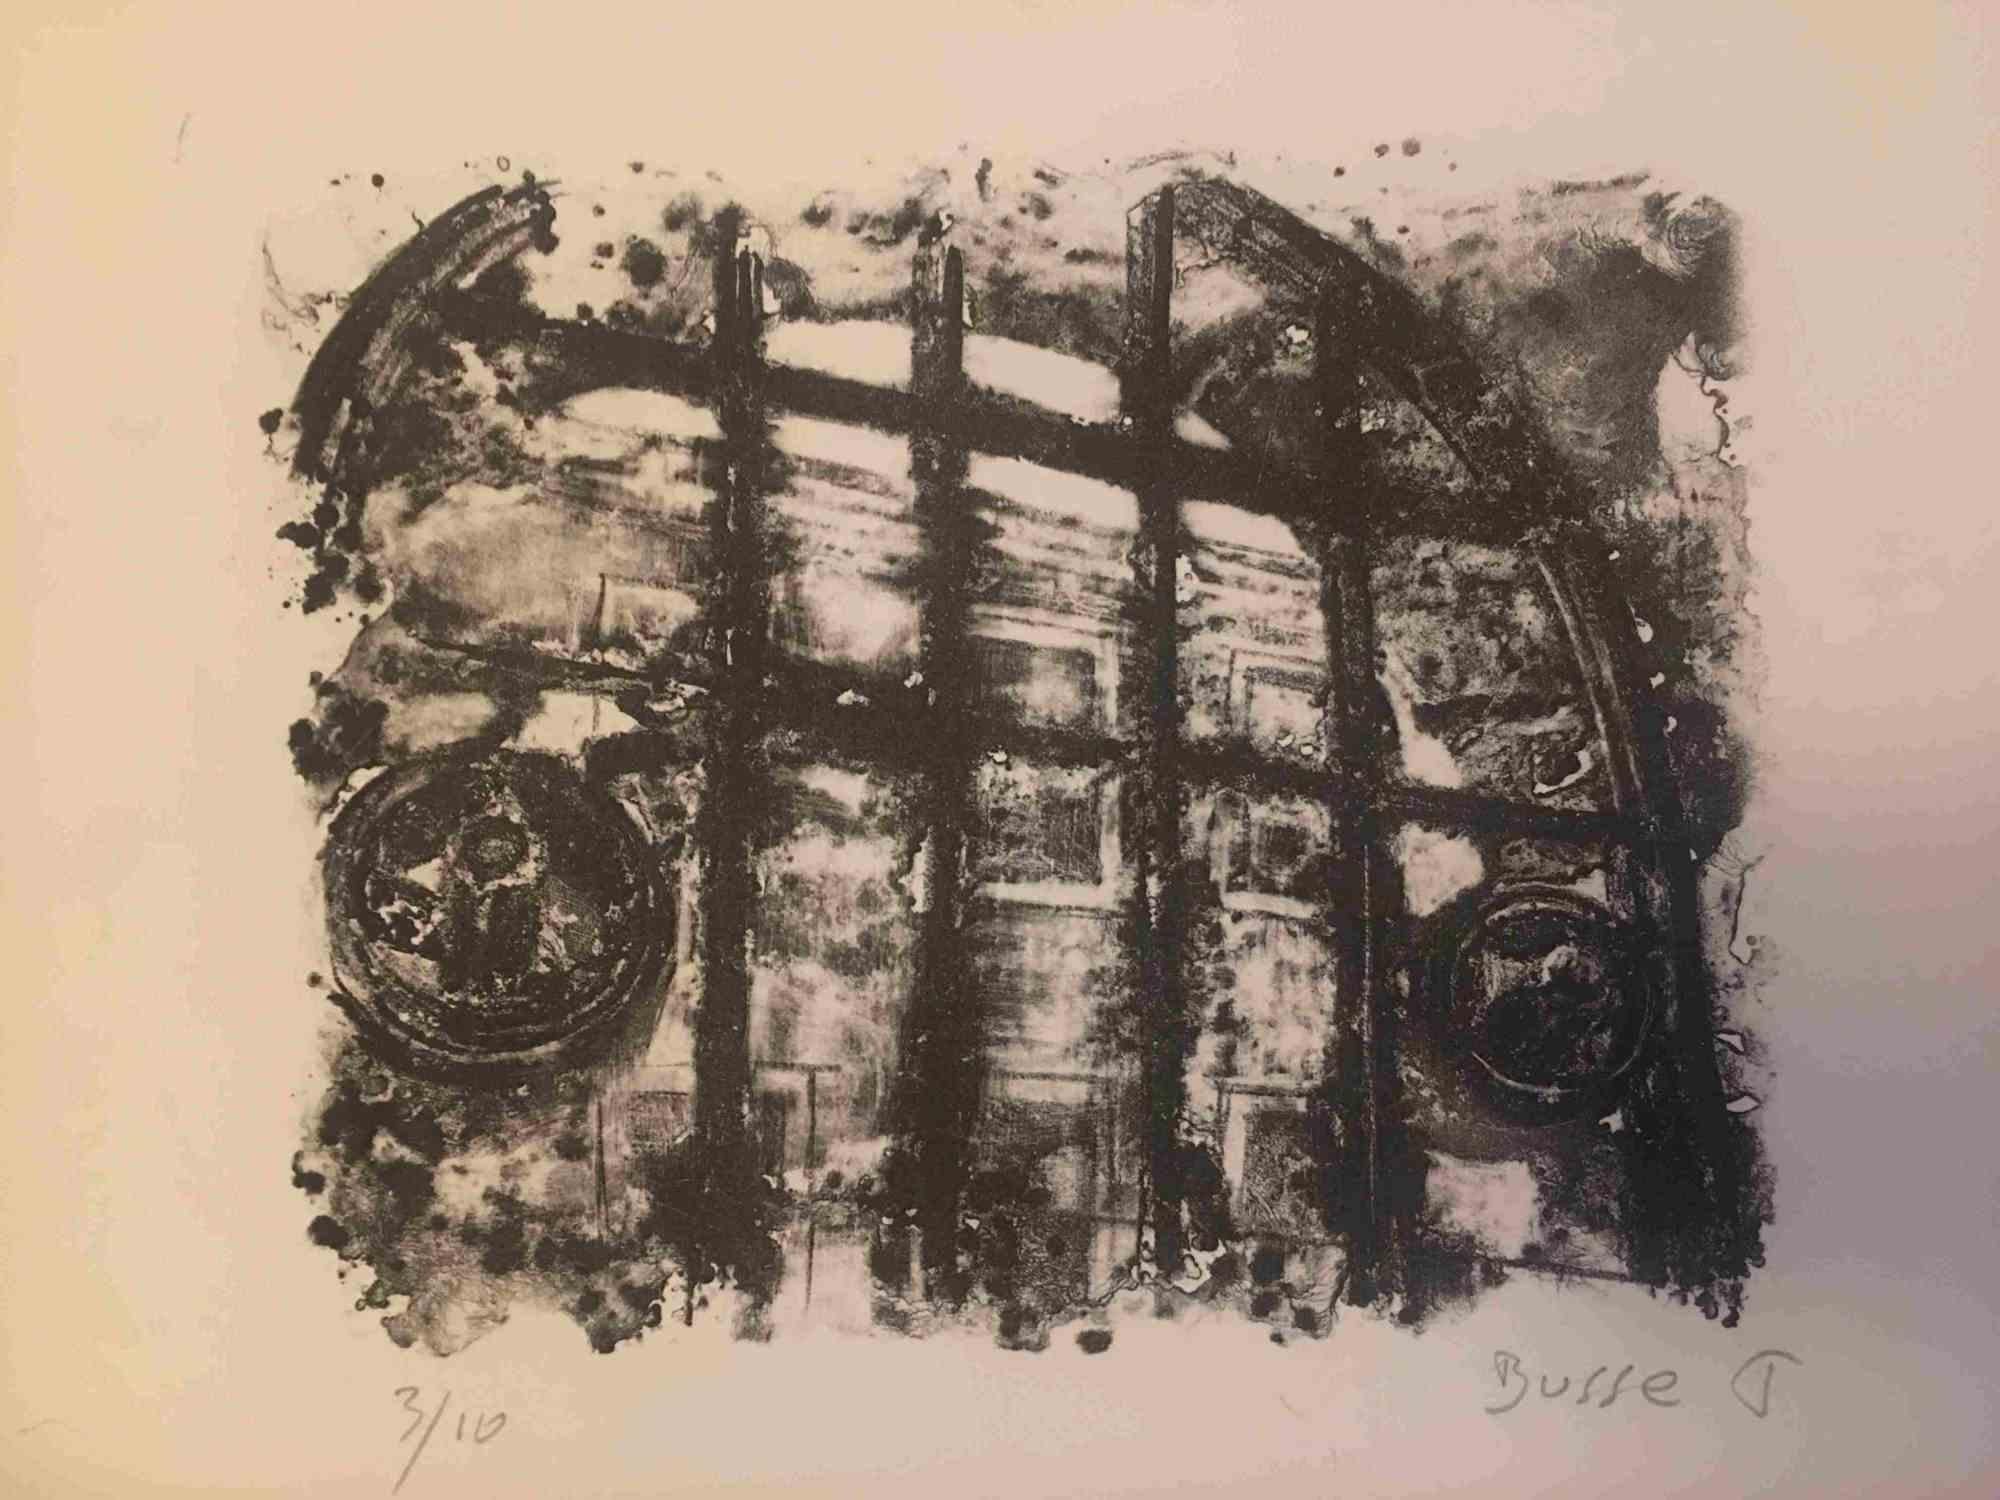 The Window is an original artwork realized by French artist  Jacques Busse (1922-2004)

Lithograph print.

Hand-signed on the lower right in pencil. Numbered on the lower left, the edition of 3/10 prints.

Good conditions

Jacques Busse was born in